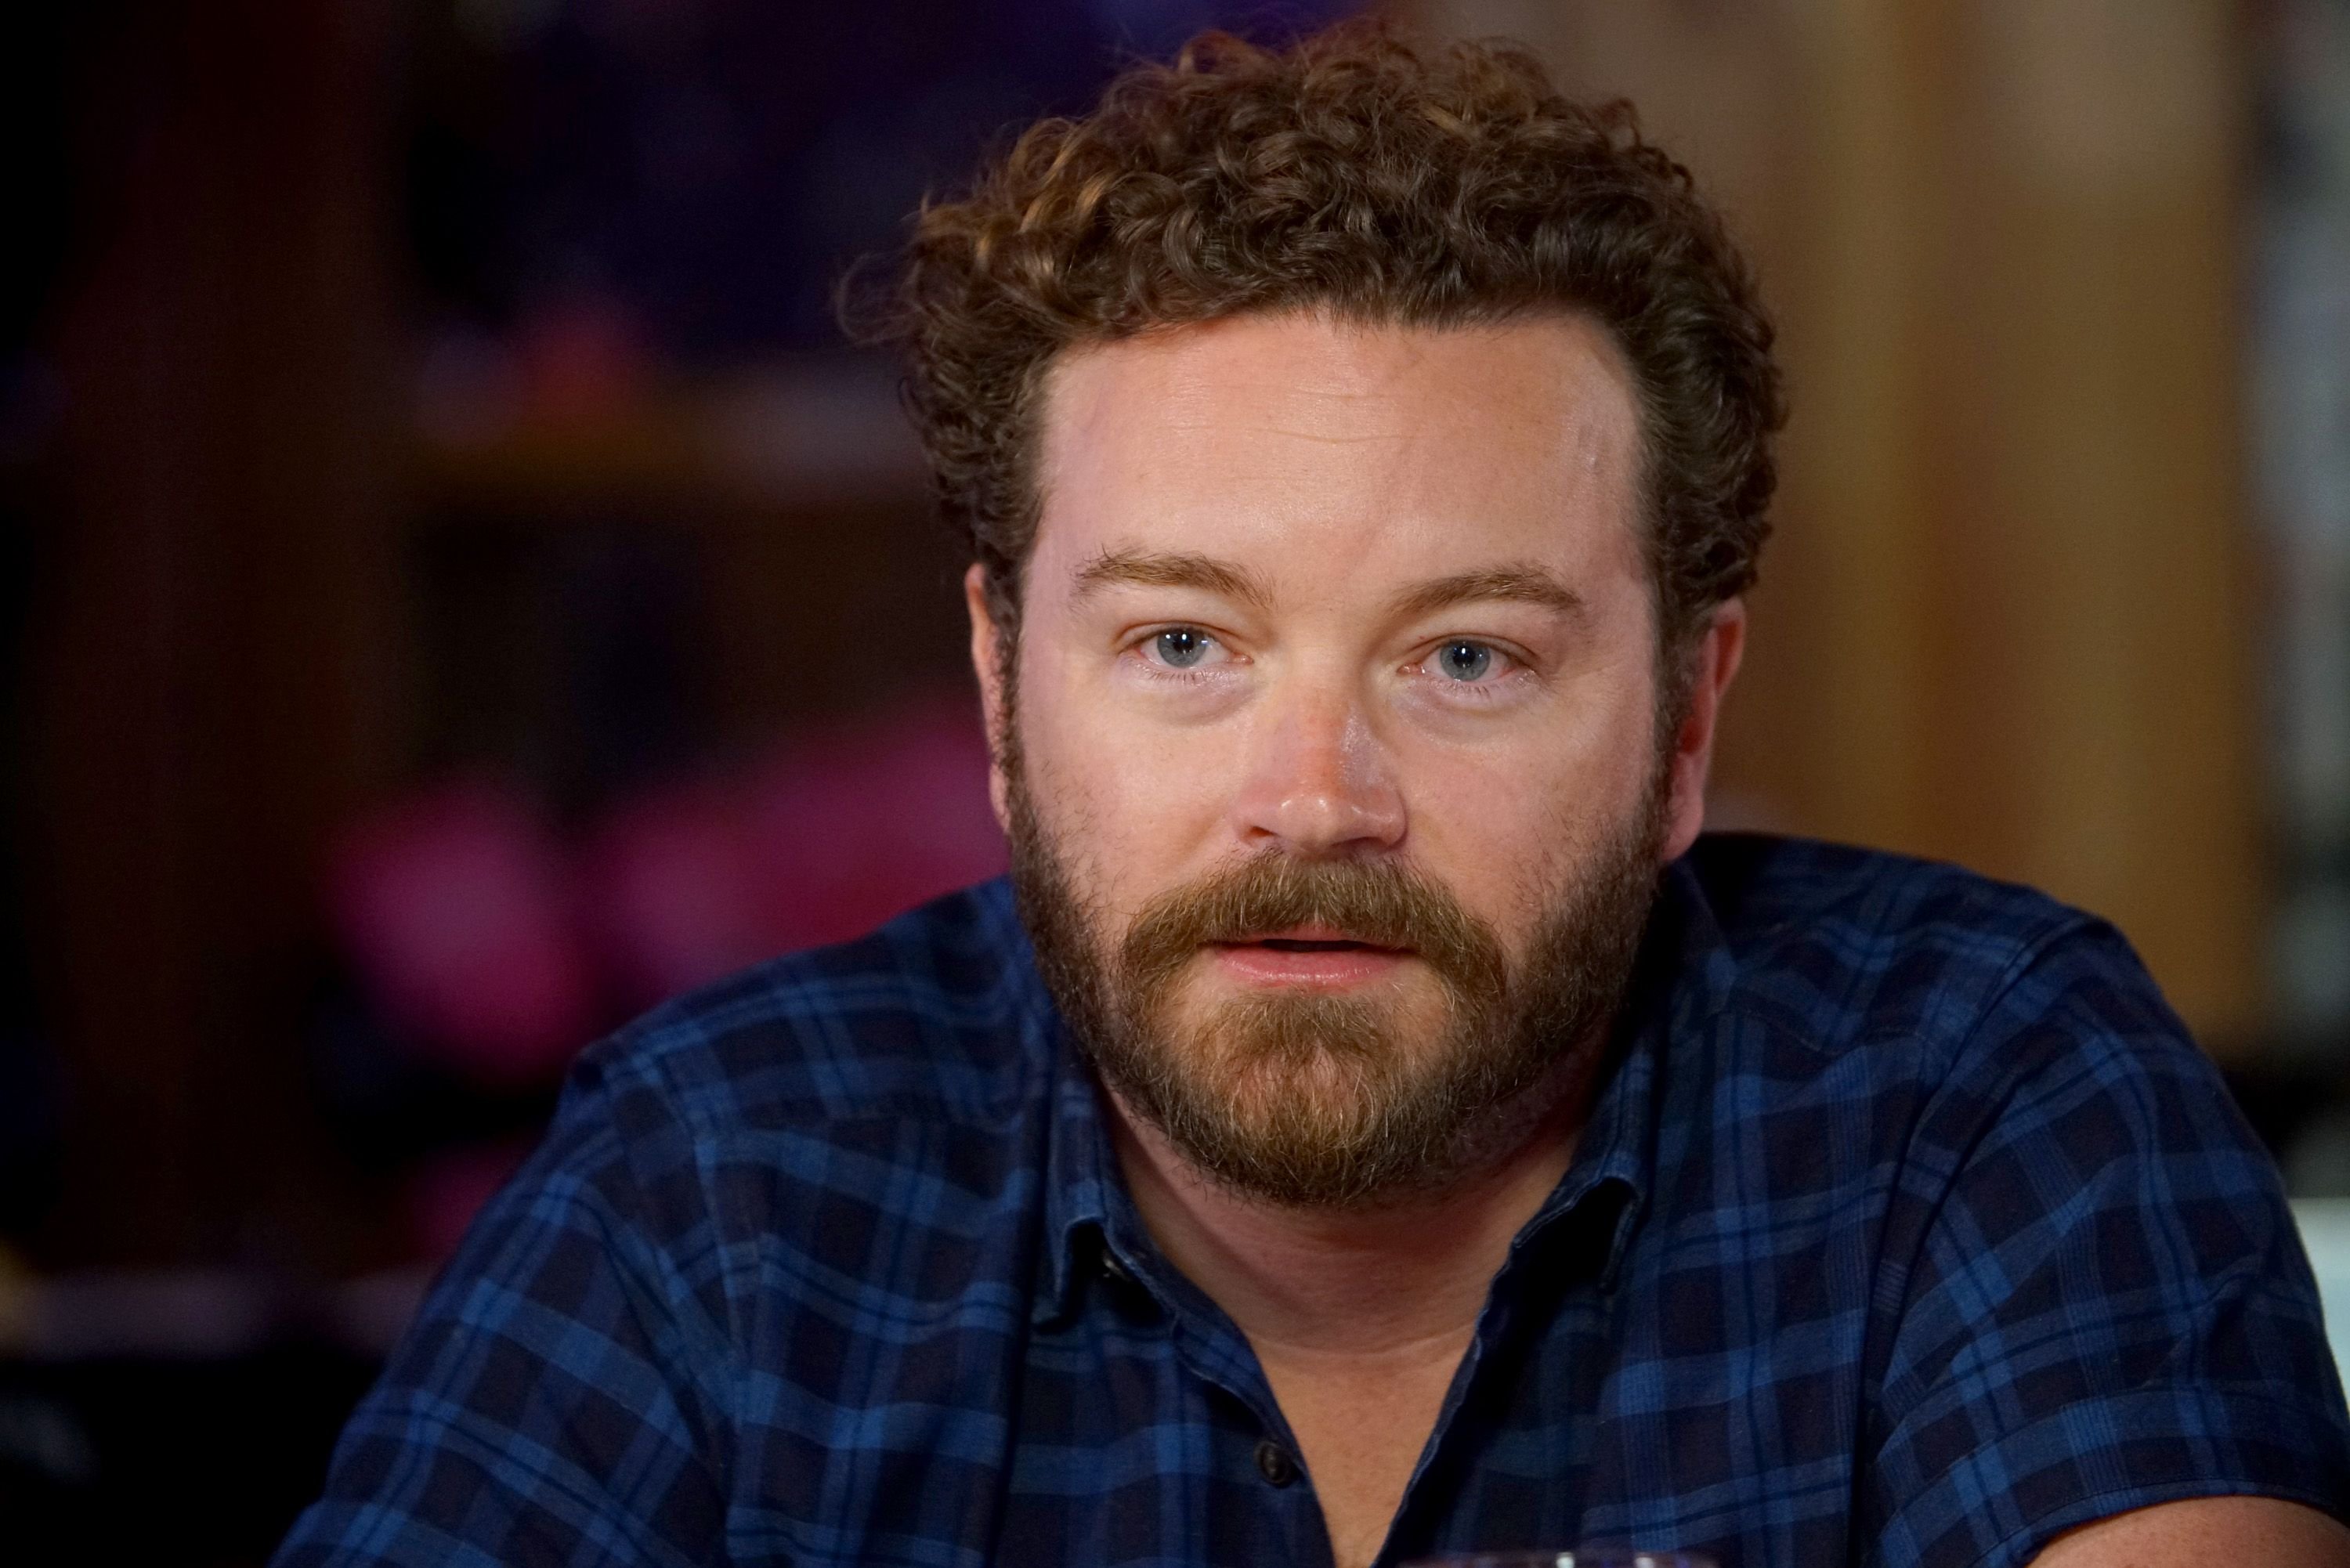 Danny Masterson at a launch event for "The Ranch: Part 3" on June 7, 2017, in Nashville, Tennessee | Photo: Anna Webber/Getty Images